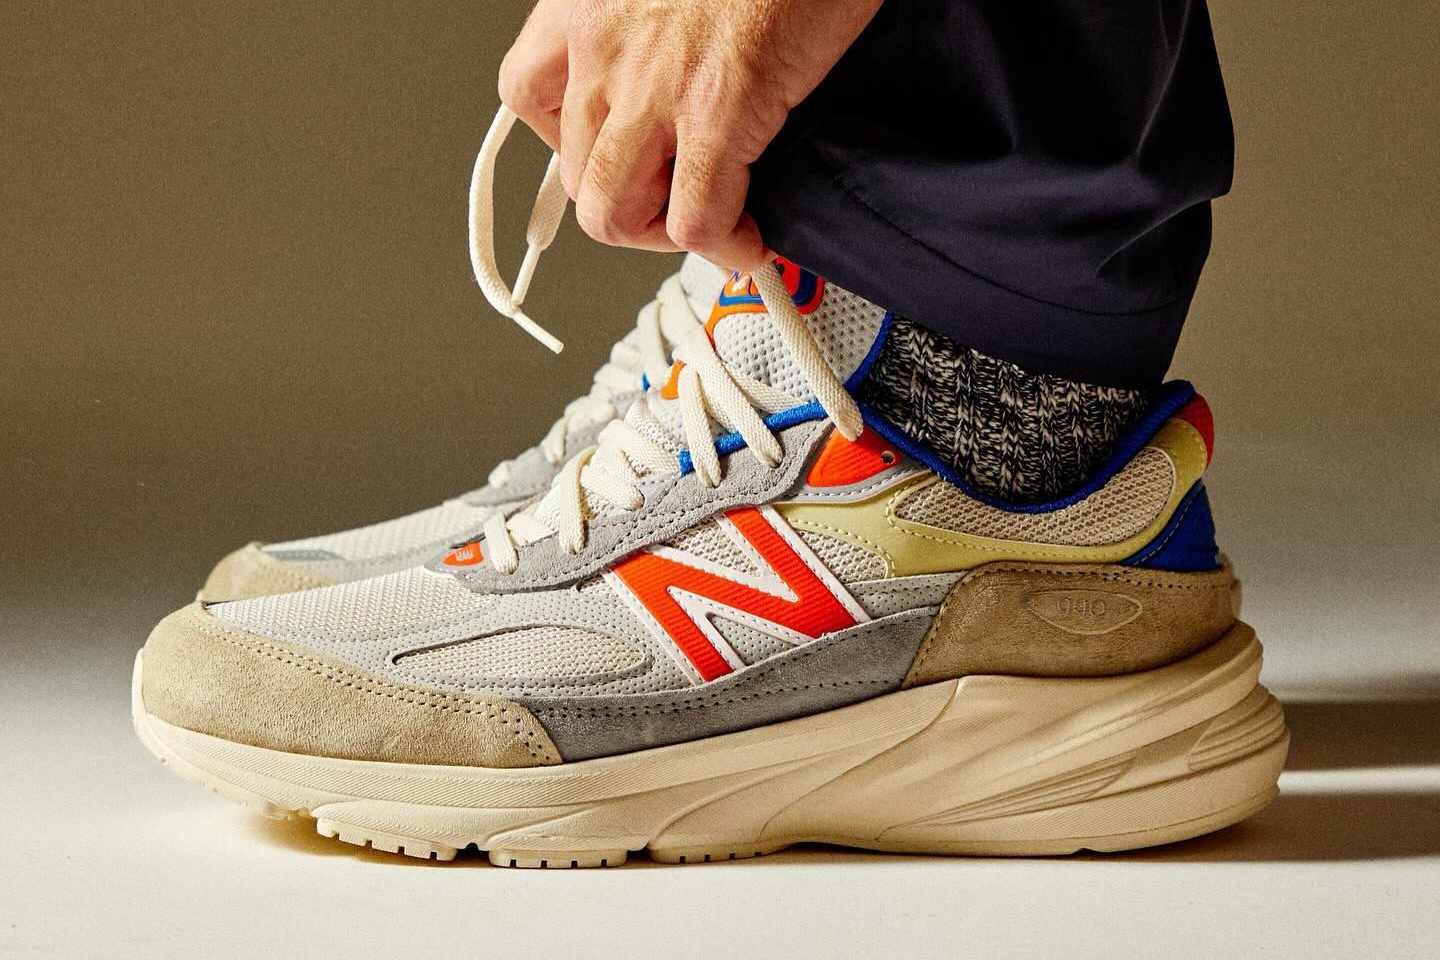 KITH's New Balance 990v6 Is a Madison Square Garden Collab